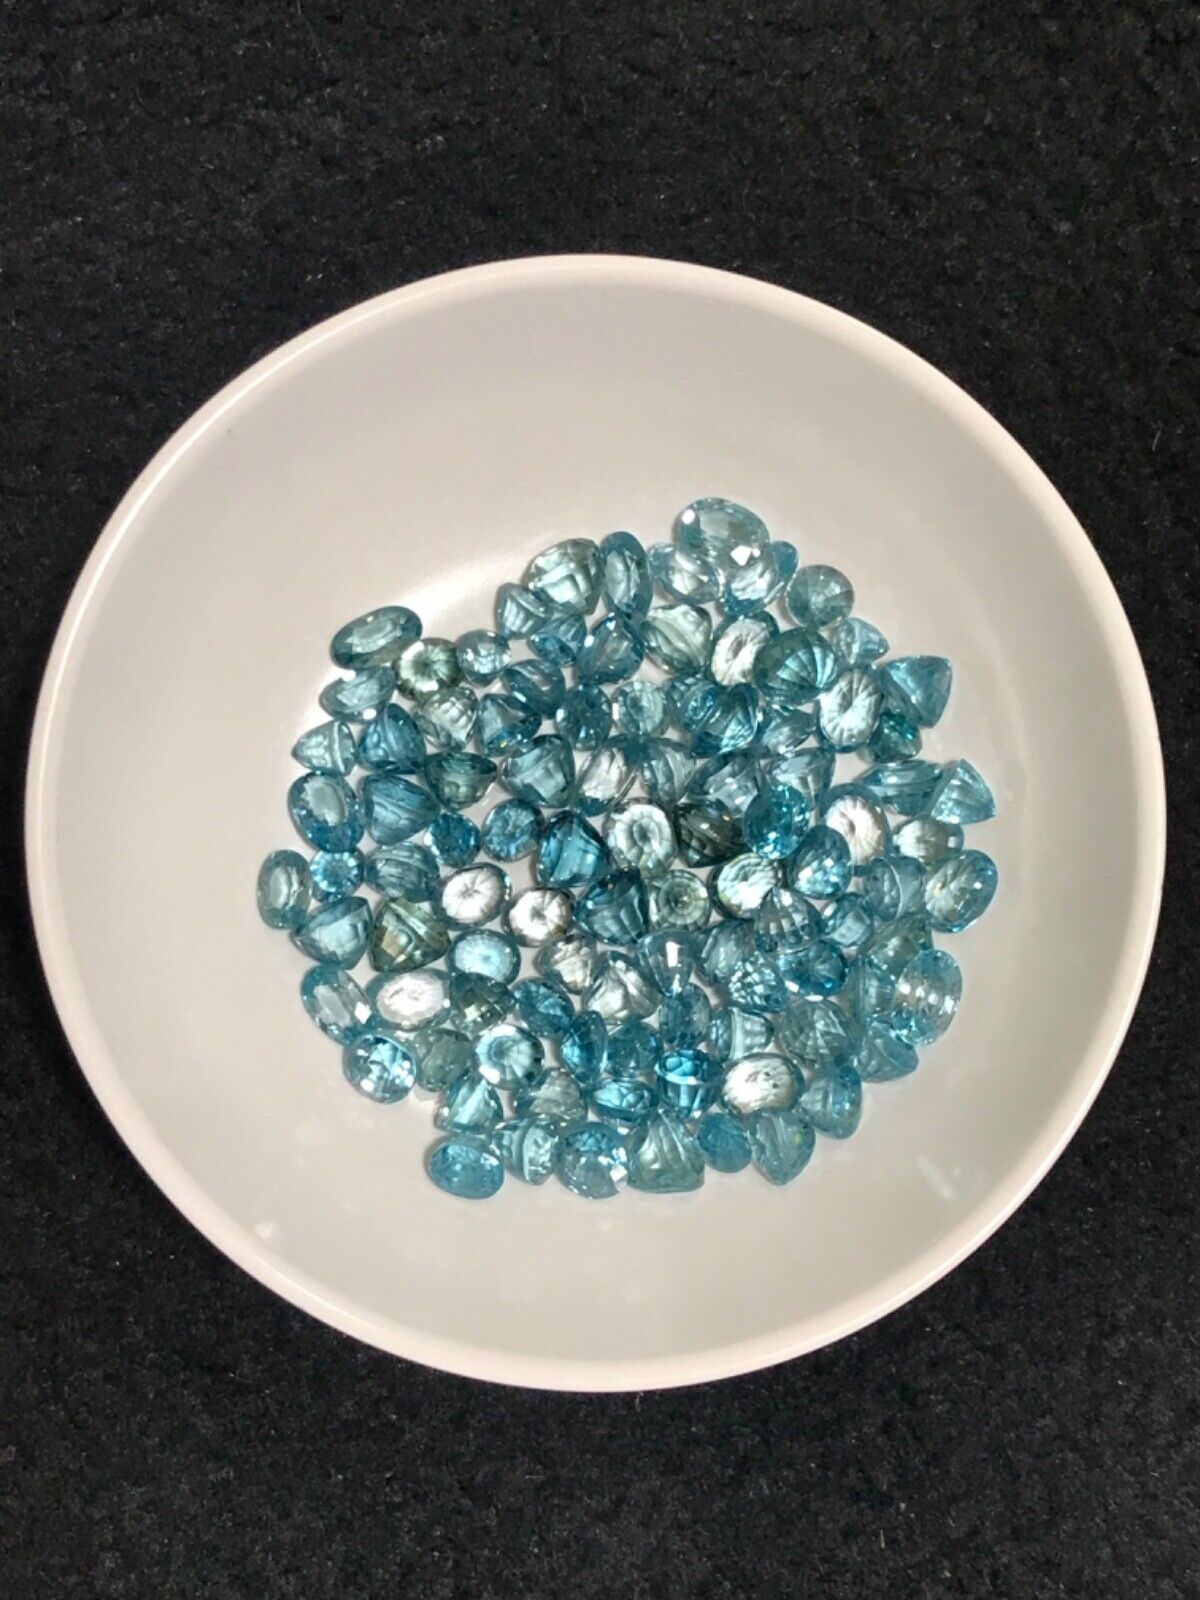 Natural beautiful blue Zircon lot loose gemstone from Africa